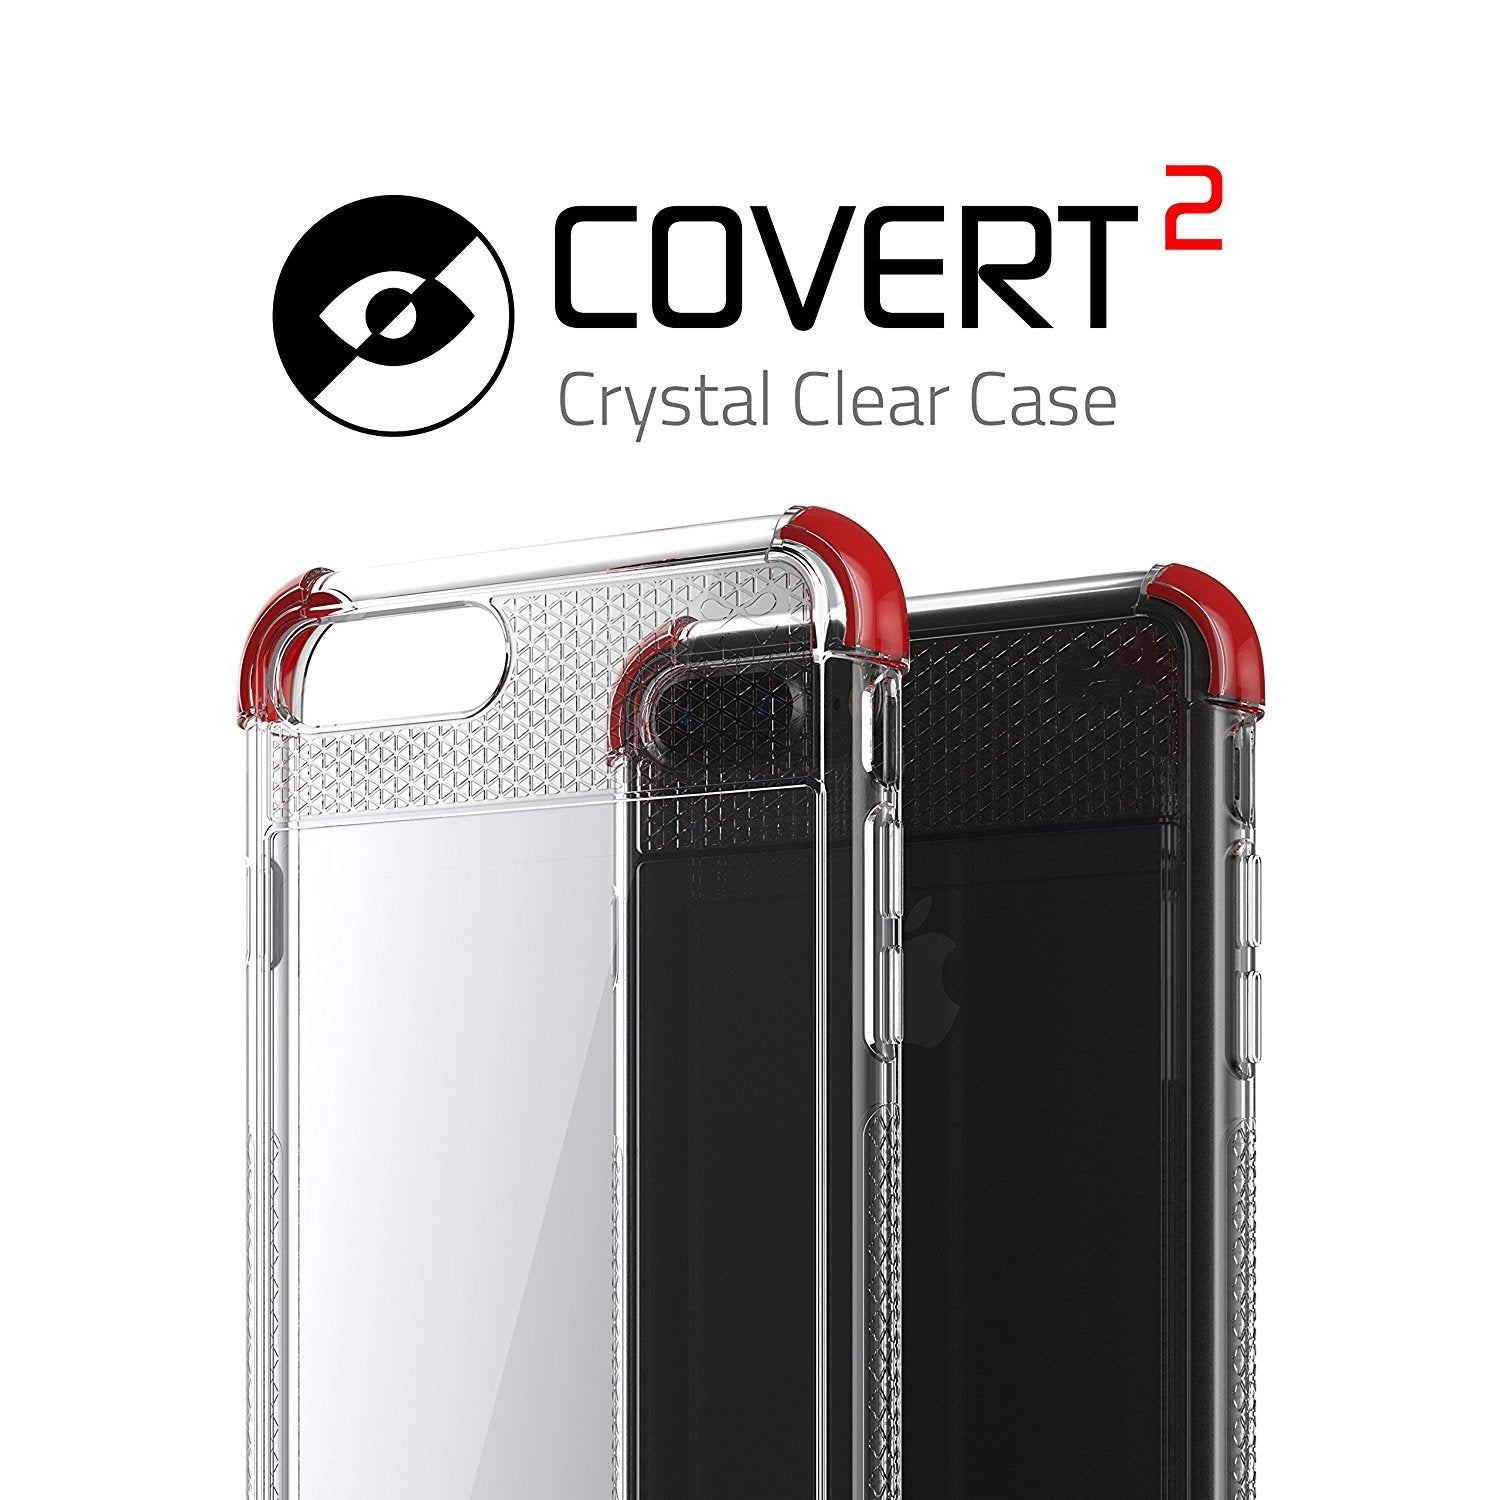 iPhone 7+ Plus Case, Ghostek Covert 2 Series for iPhone 7+ Plus Protective Case [ Red]